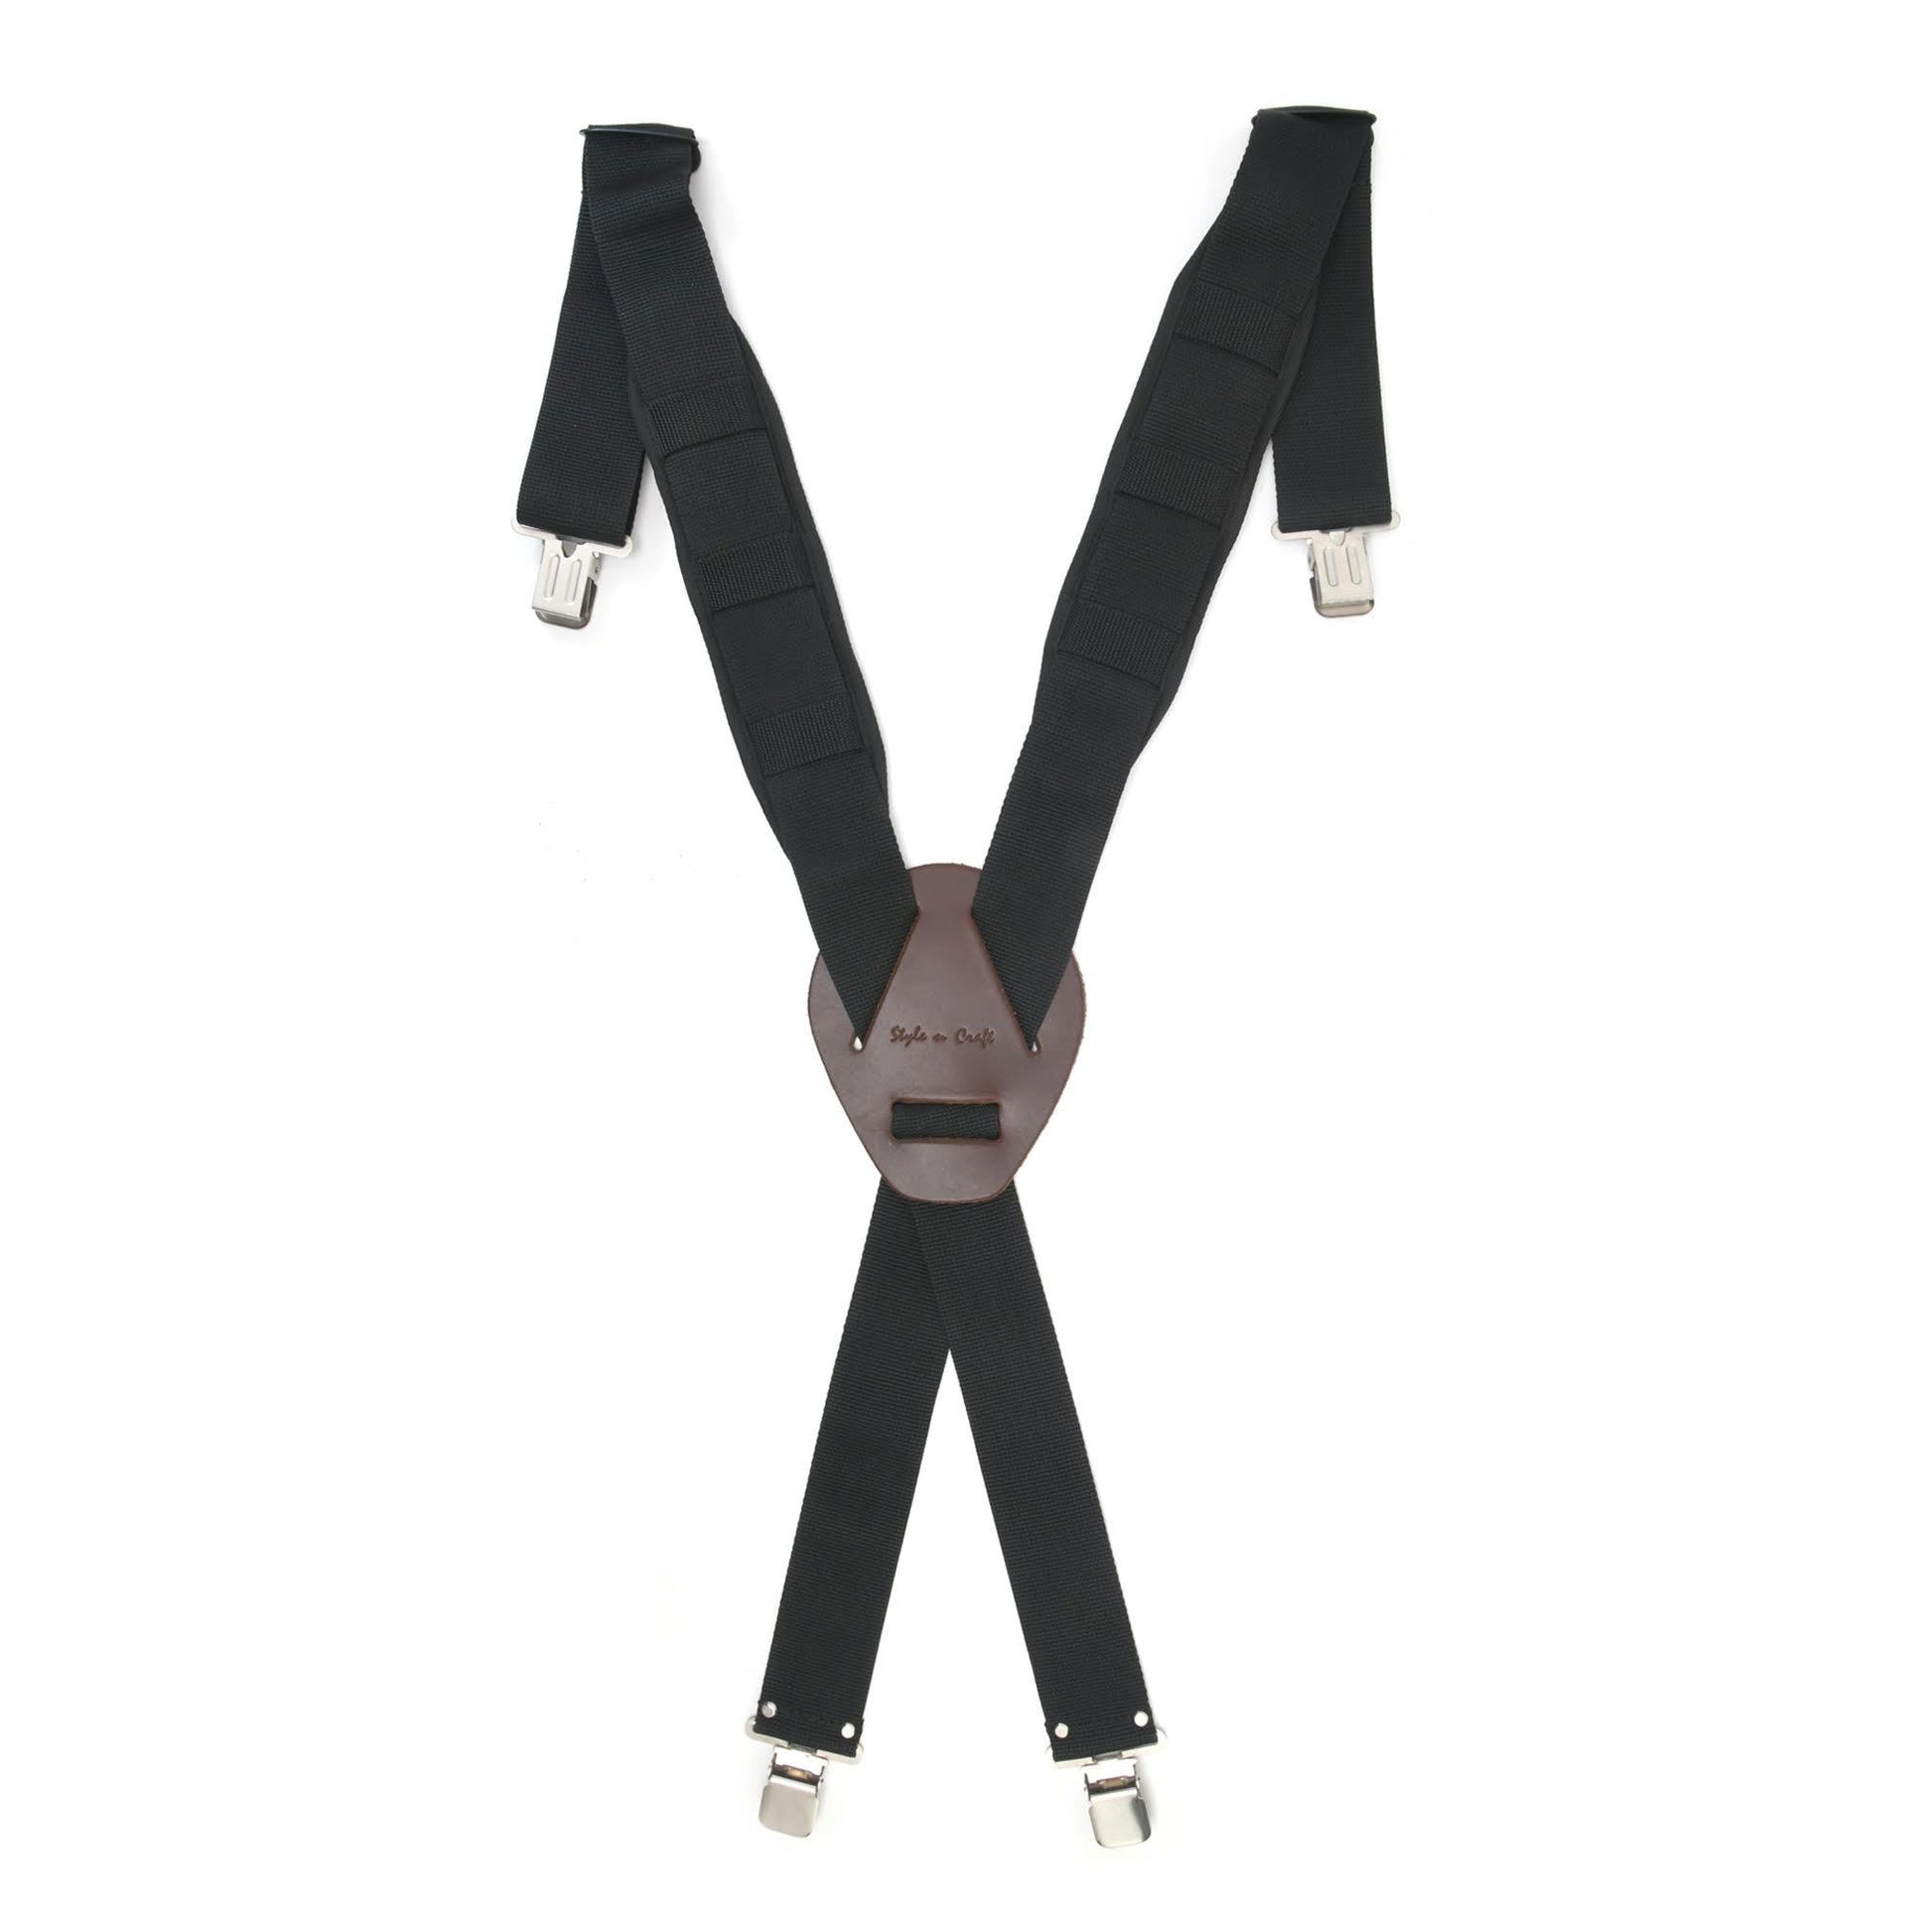 2 Inch Wide Padded Work Suspenders with Metal Clips, Style n Craft